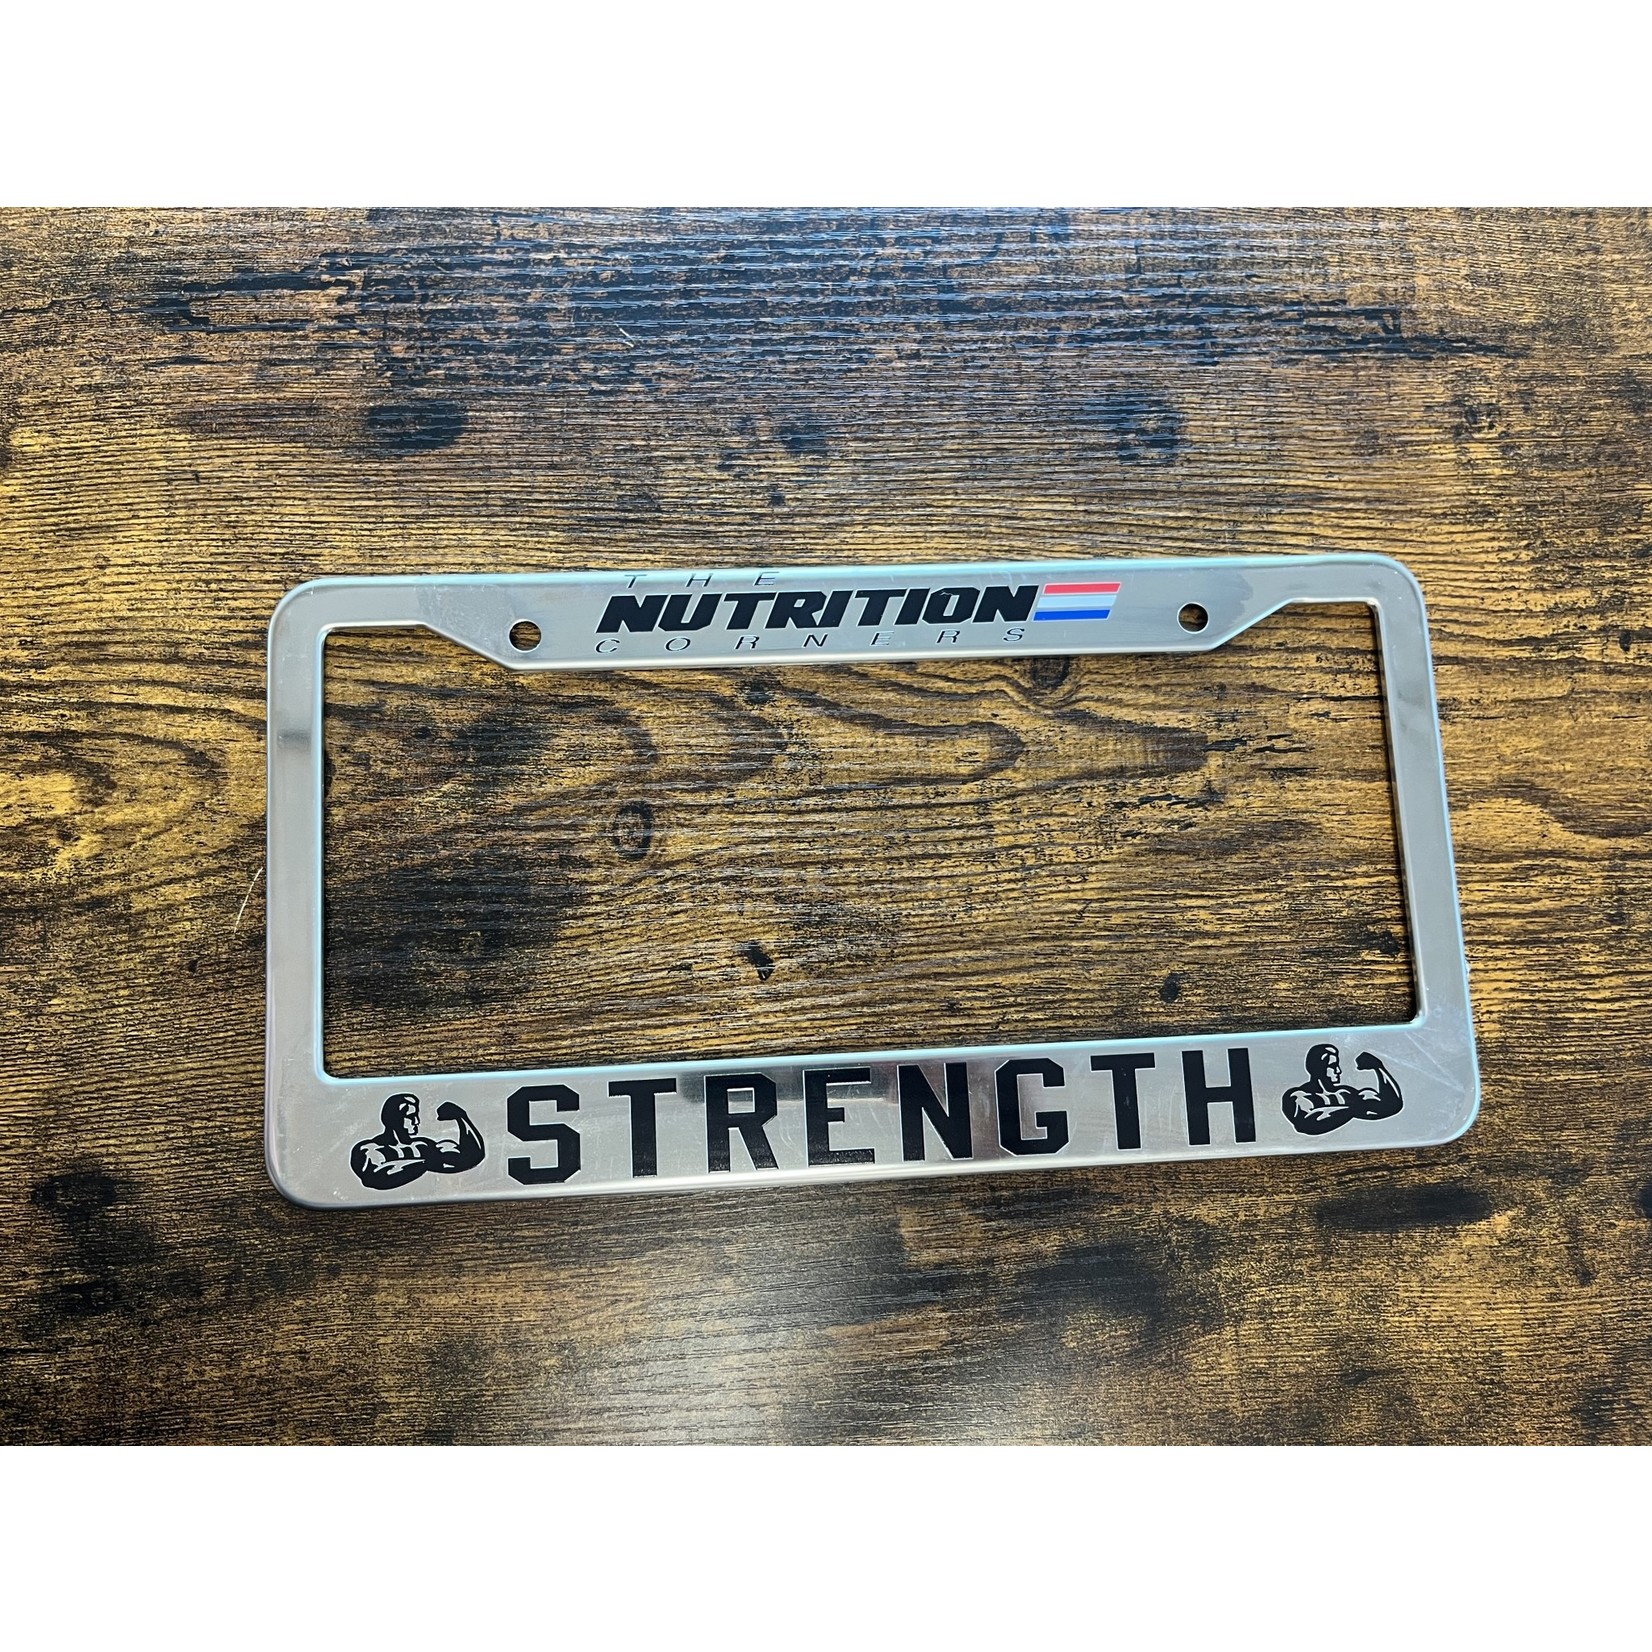 Nutrition Corners NC License Plate Cover Chrome